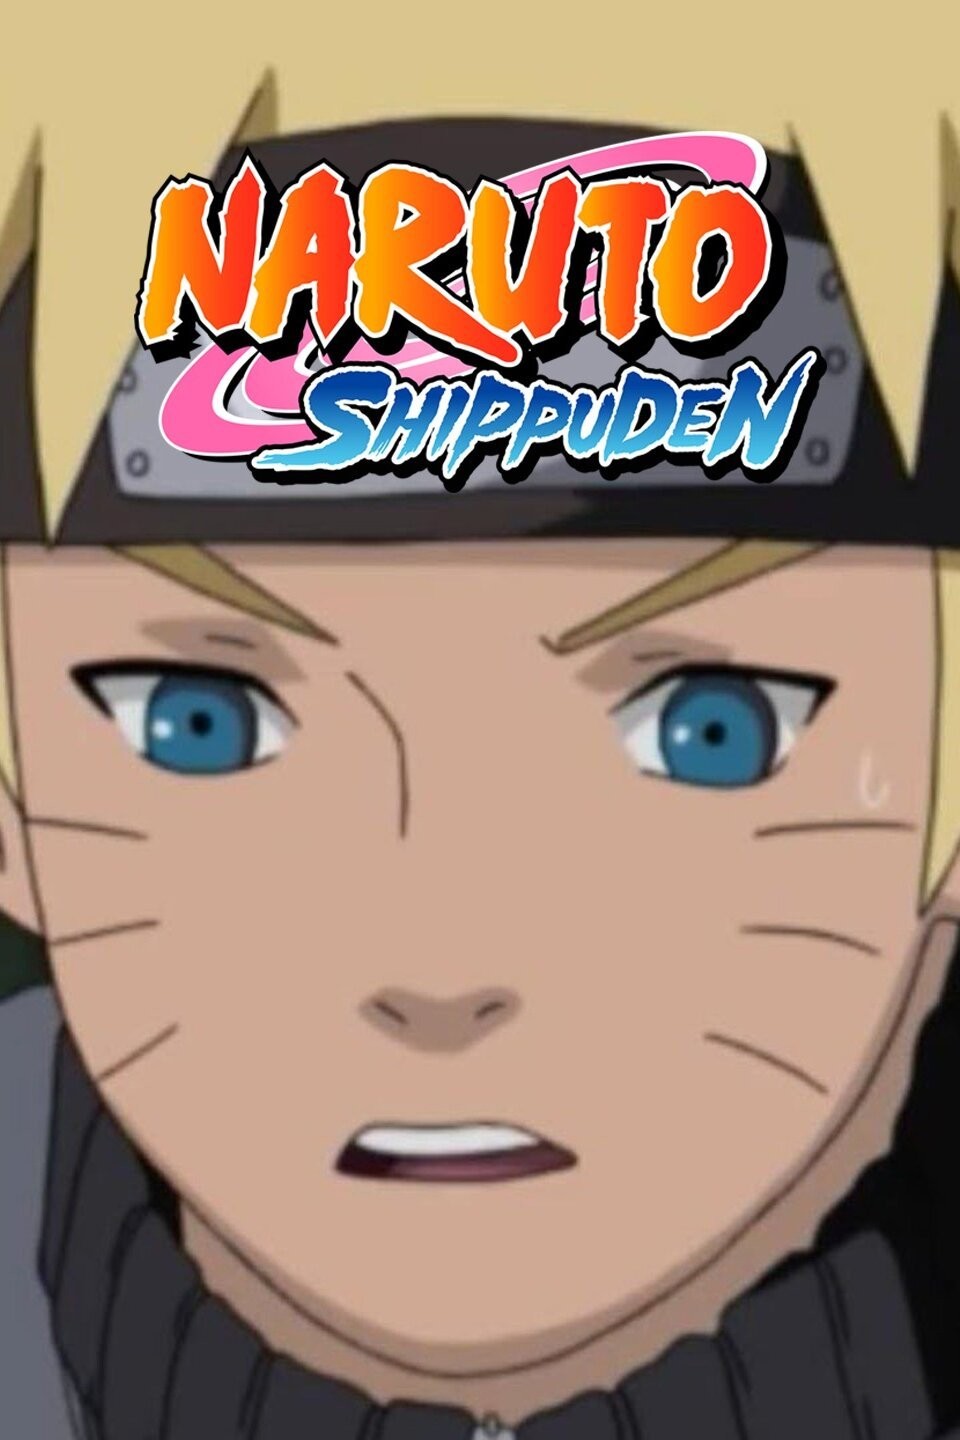 The only time, Naruto went back On his word! You'll roughly need 2